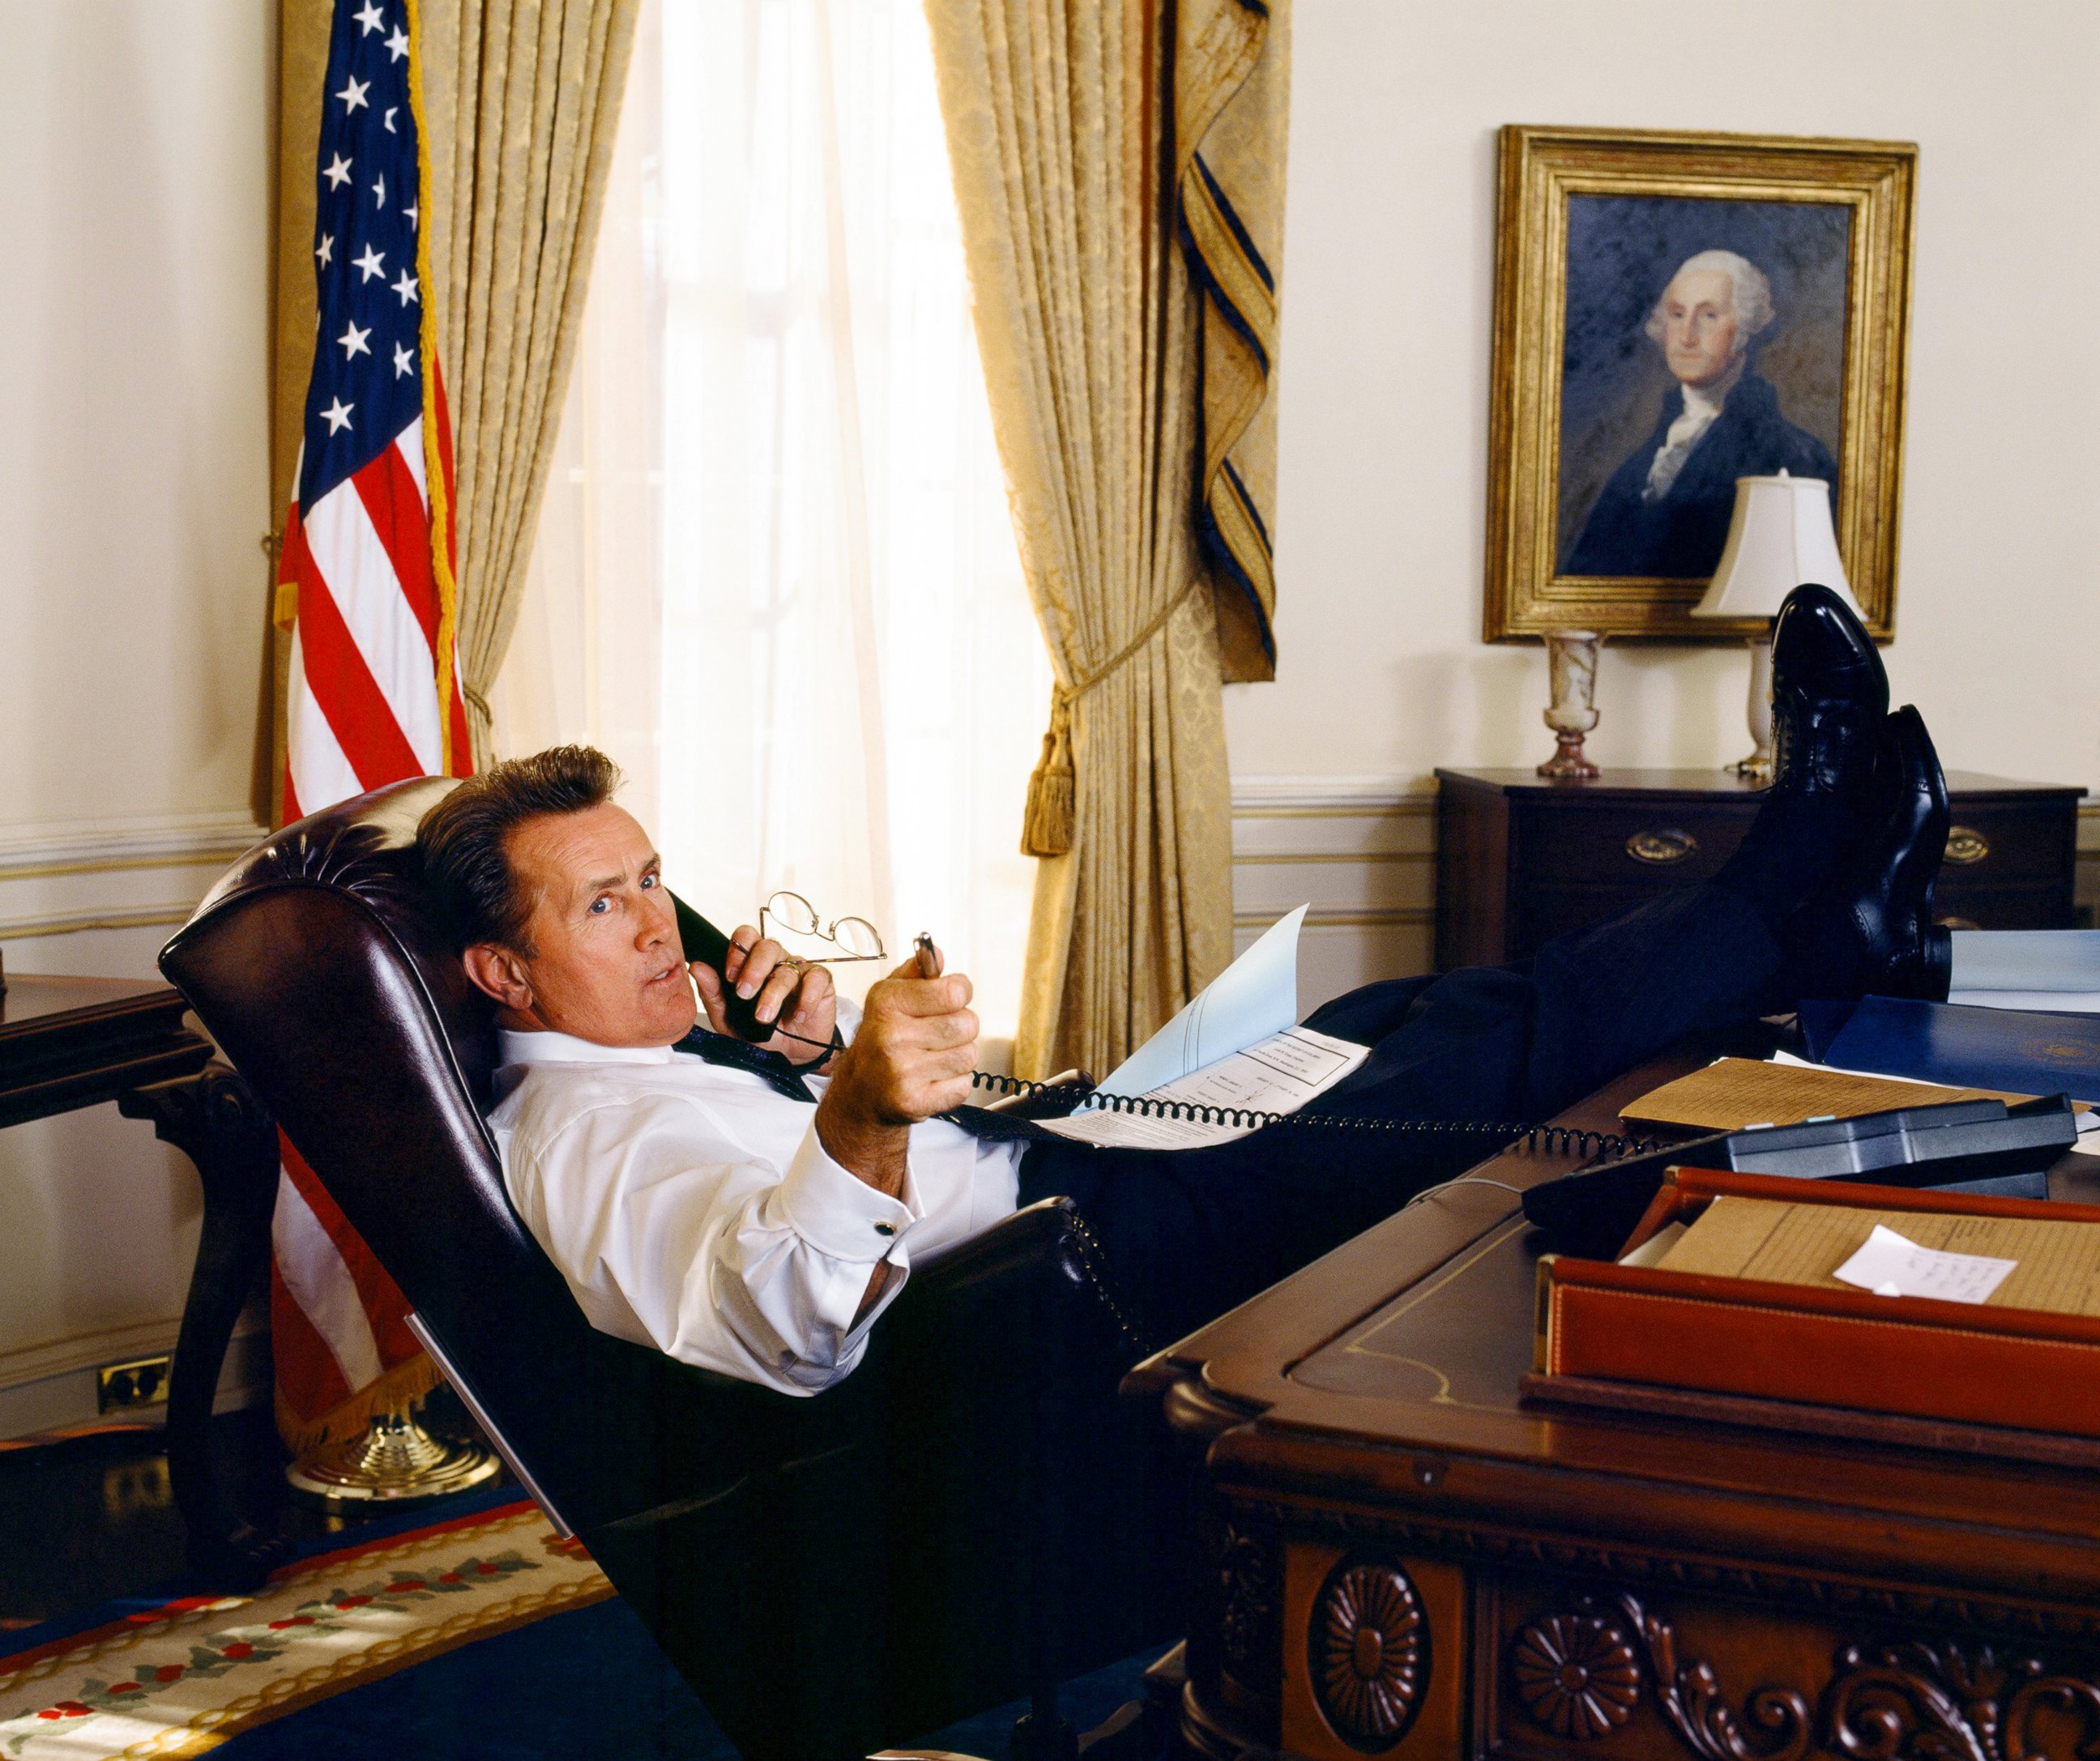 PHOTO: Martin Sheen as President Josiah "Jed" Bartlet in a scene from "The West Wing."